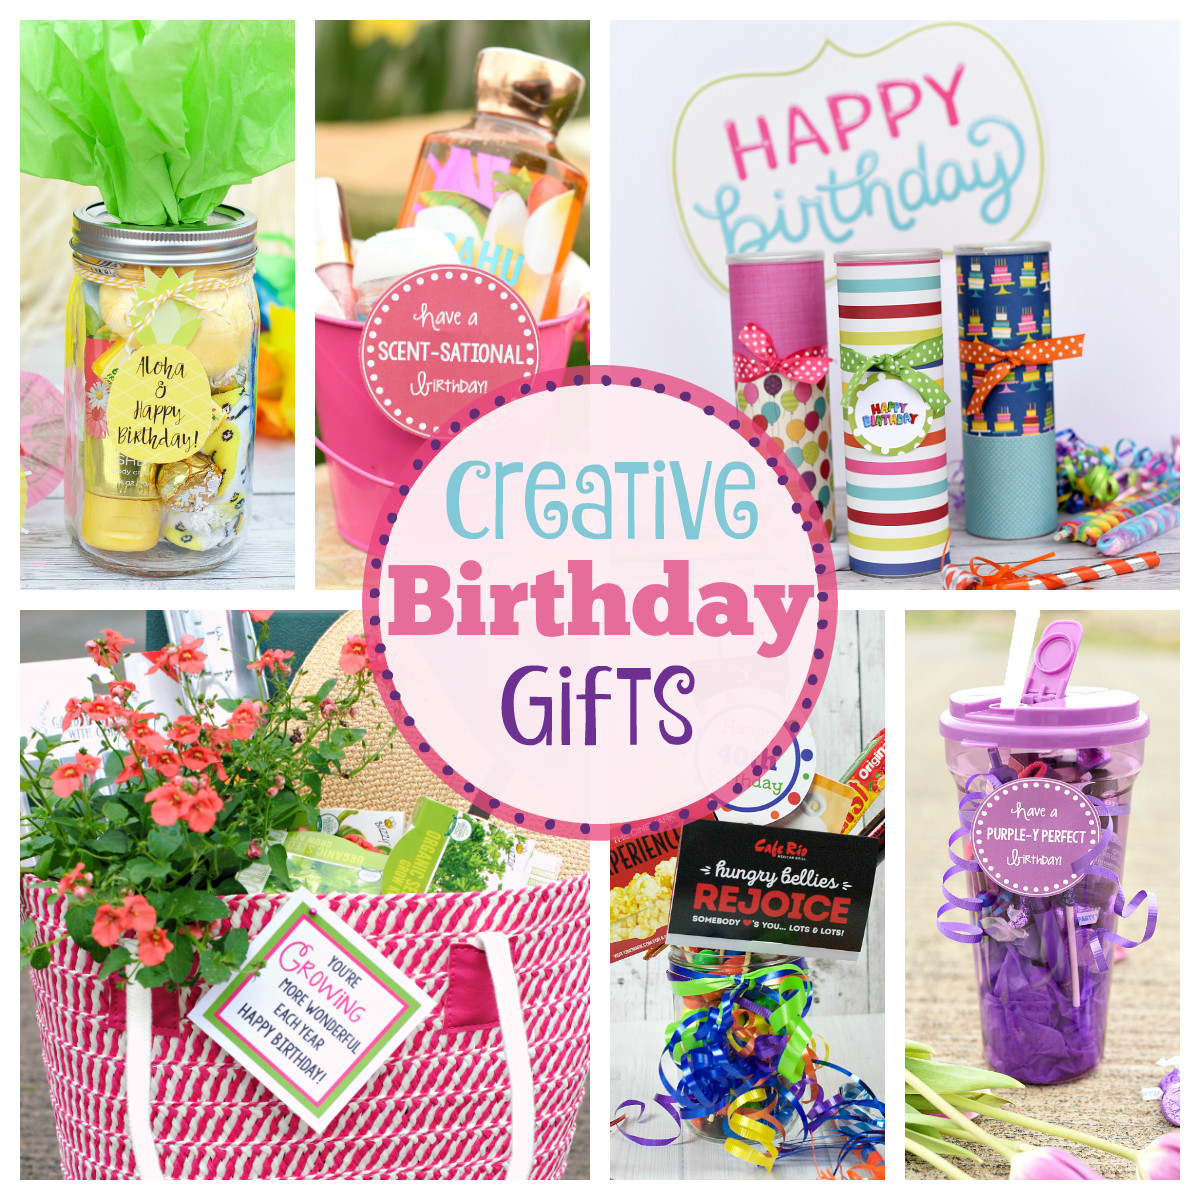 Birthday Gift For A Friend
 25 Fun Birthday Gifts Ideas for Friends Crazy Little